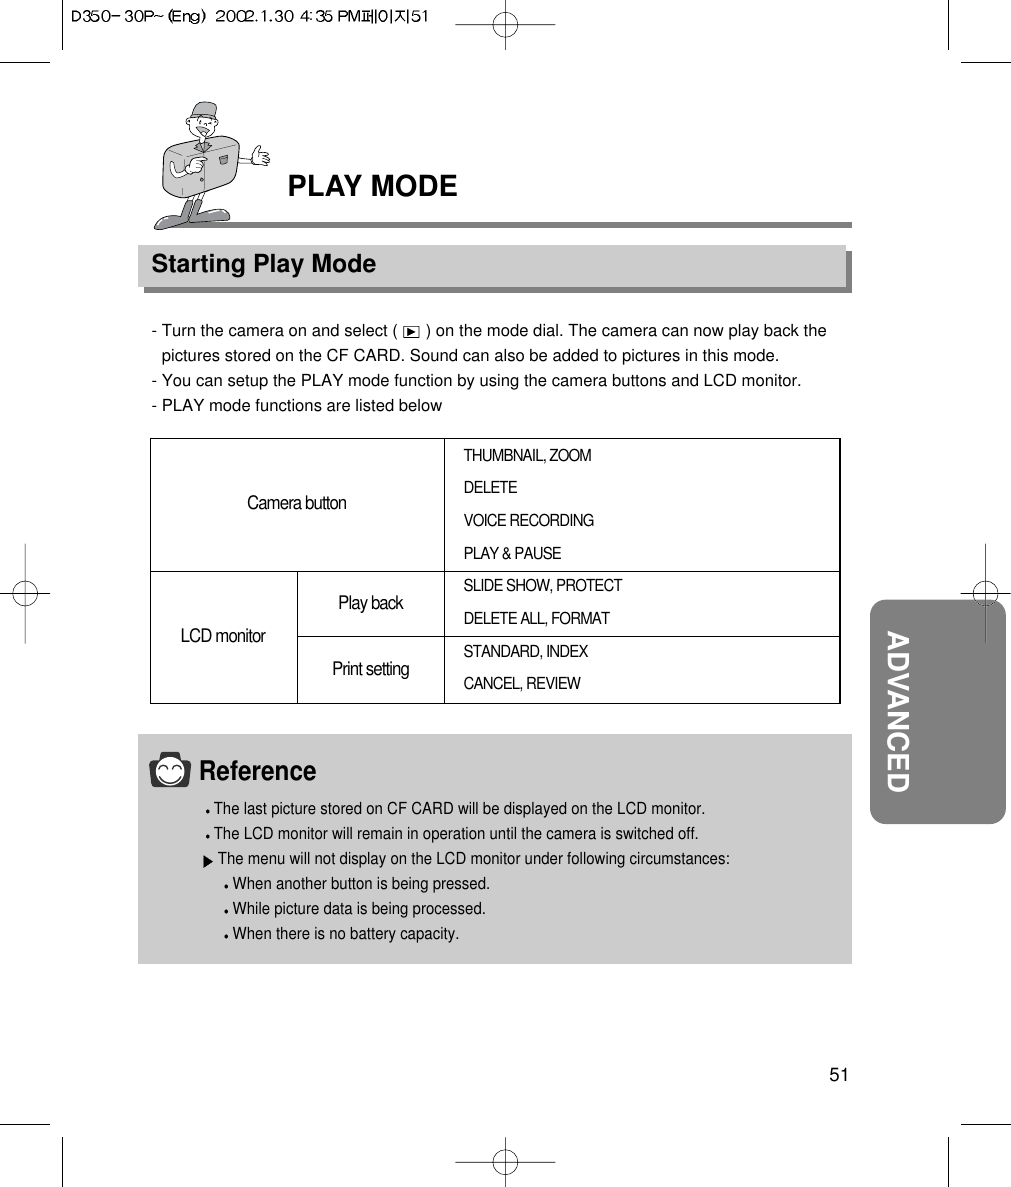 PLAY MODEStarting Play Mode51ADVANCED- Turn the camera on and select (      ) on the mode dial. The camera can now play back thepictures stored on the CF CARD. Sound can also be added to pictures in this mode.- You can setup the PLAY mode function by using the camera buttons and LCD monitor.- PLAY mode functions are listed belowTHUMBNAIL, ZOOMDELETEVOICE RECORDINGPLAY &amp; PAUSE SLIDE SHOW, PROTECTDELETE ALL, FORMATSTANDARD, INDEXCANCEL, REVIEWCamera buttonLCD monitorPlay backPrint settingReferenceThe last picture stored on CF CARD will be displayed on the LCD monitor.The LCD monitor will remain in operation until the camera is switched off.The menu will not display on the LCD monitor under following circumstances:When another button is being pressed.While picture data is being processed.When there is no battery capacity. 